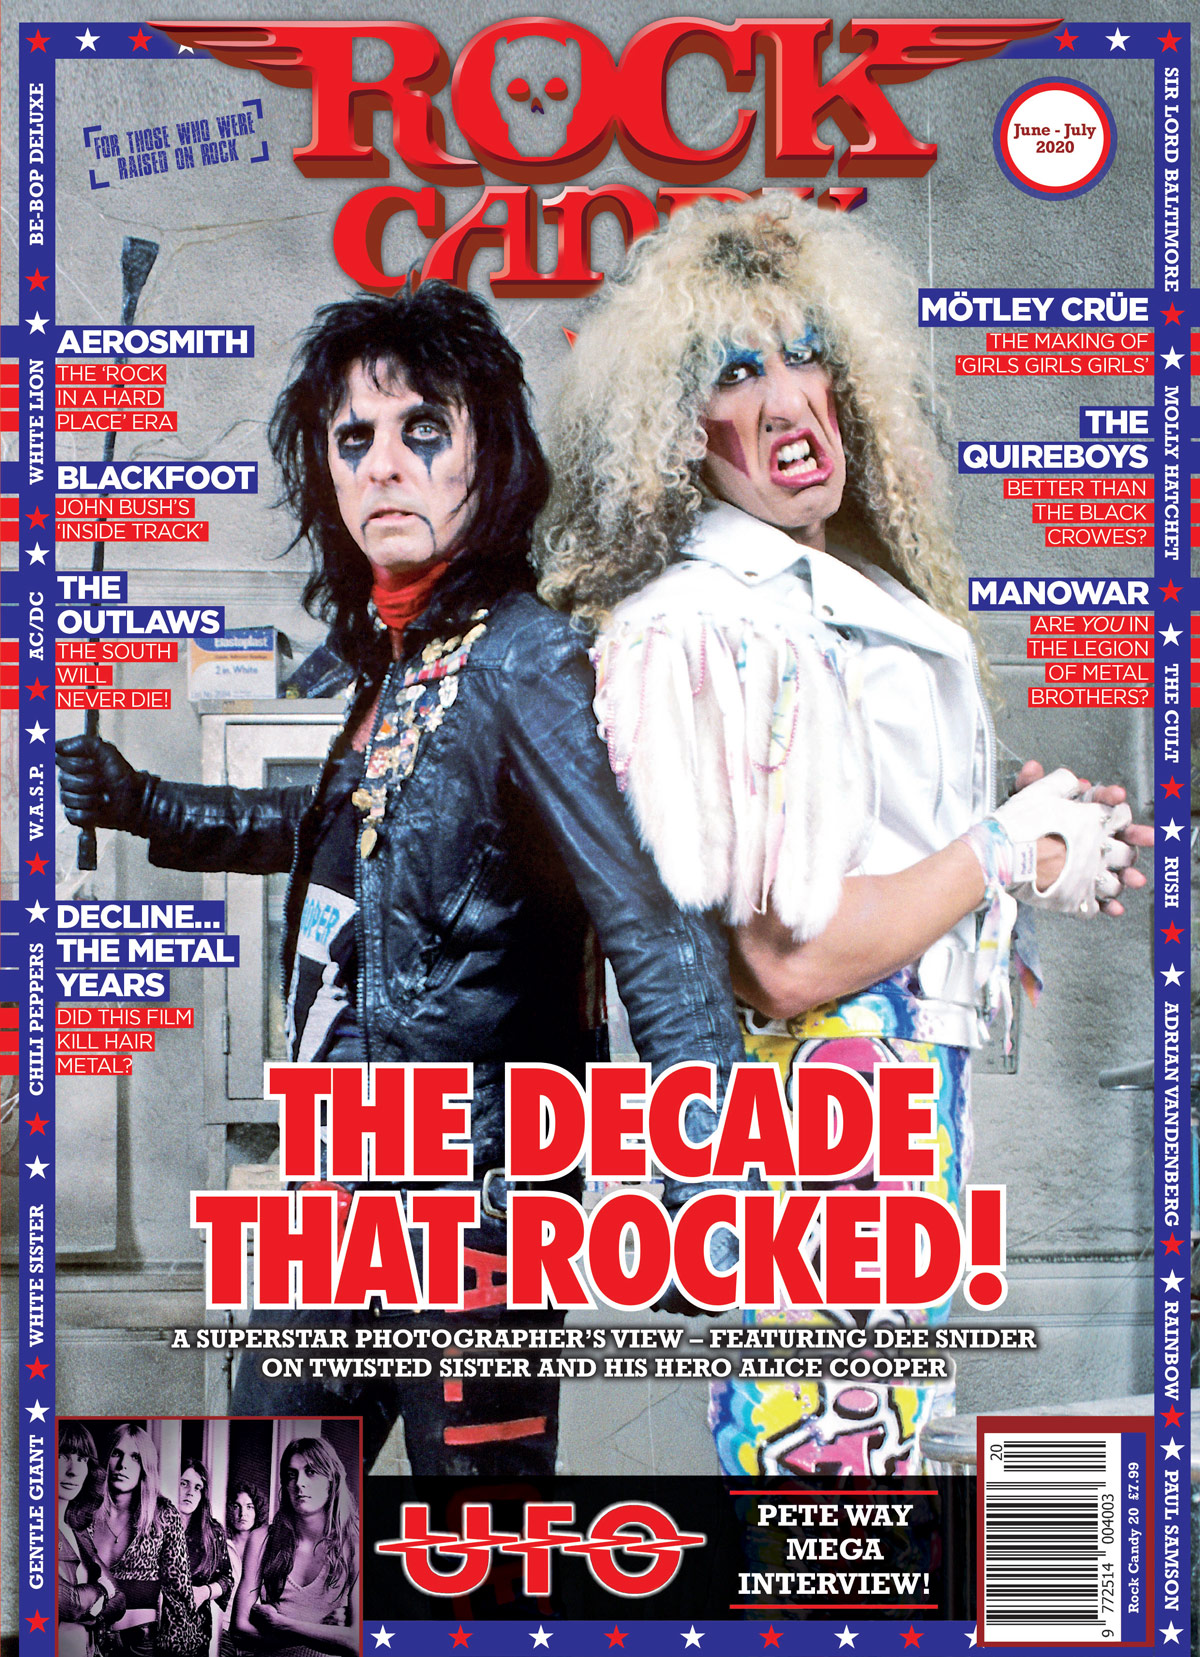 Issue 20 is available right now, featuring our fabulous cover of Dee Snider and Alice Cooper.